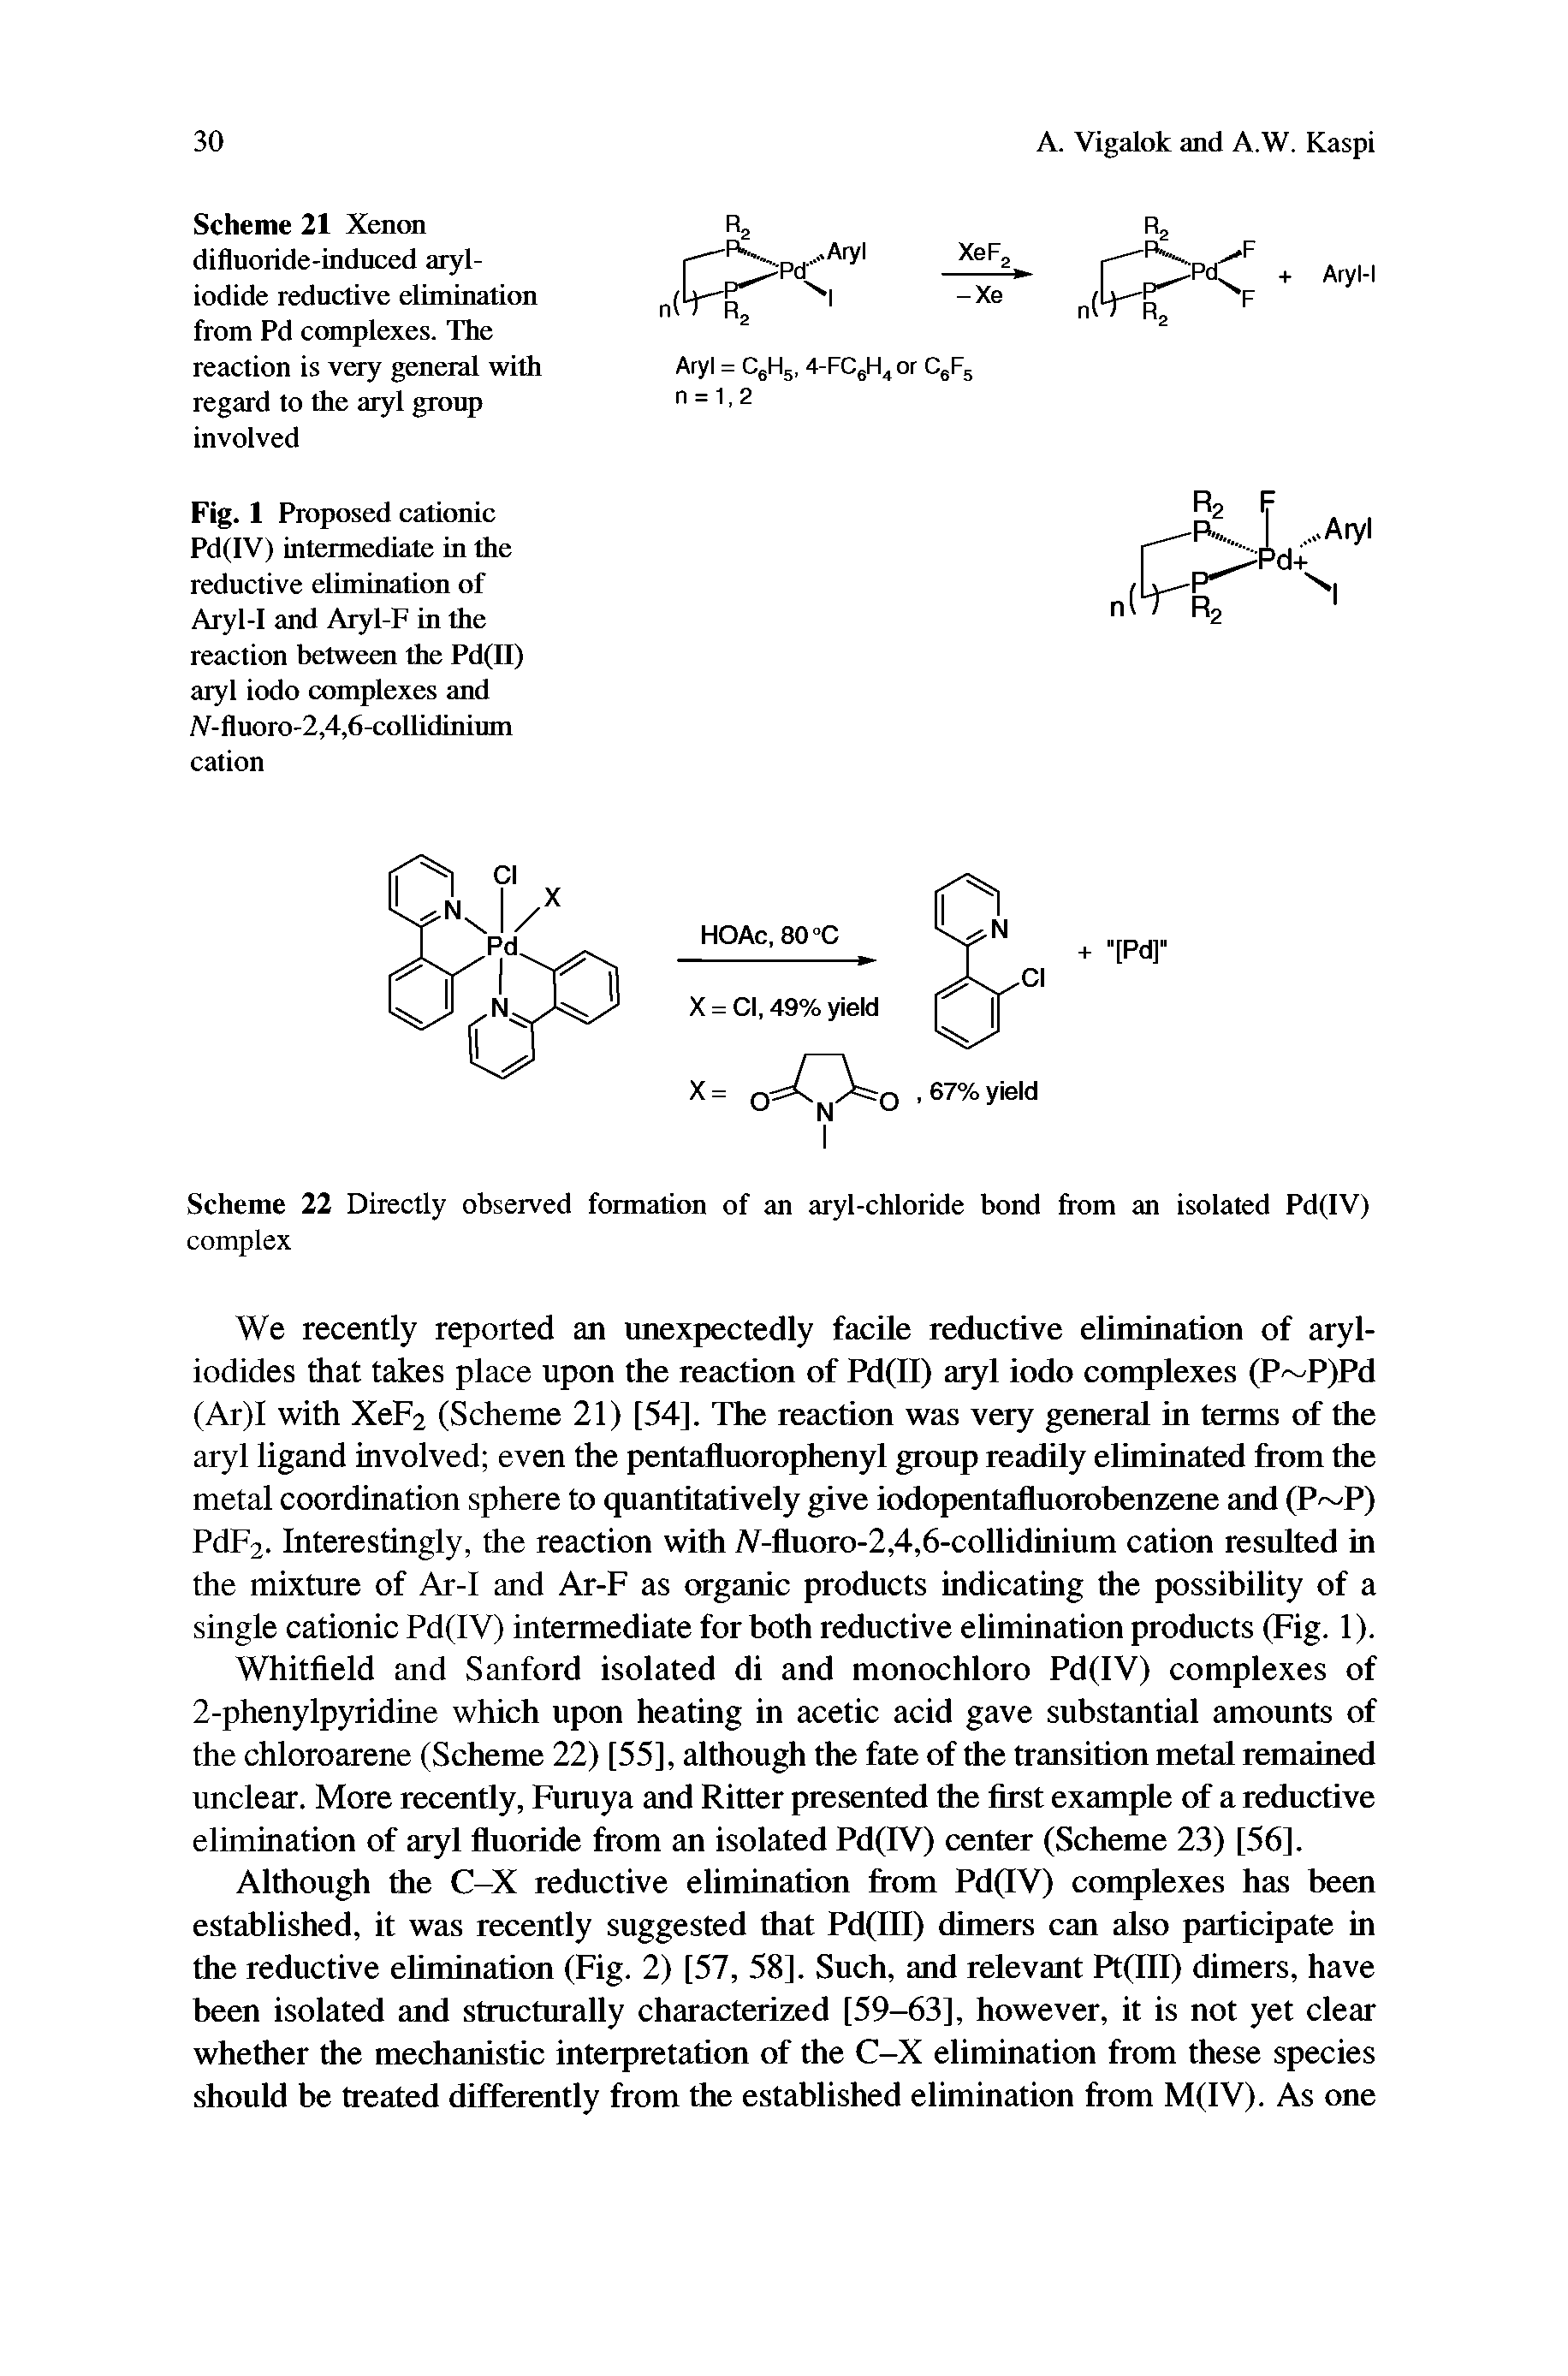 Scheme 21 Xenon difluoride-induced aryl-iodide reductive elimination from Pd complexes. The reaction is very general with regard to the aryl group involved...